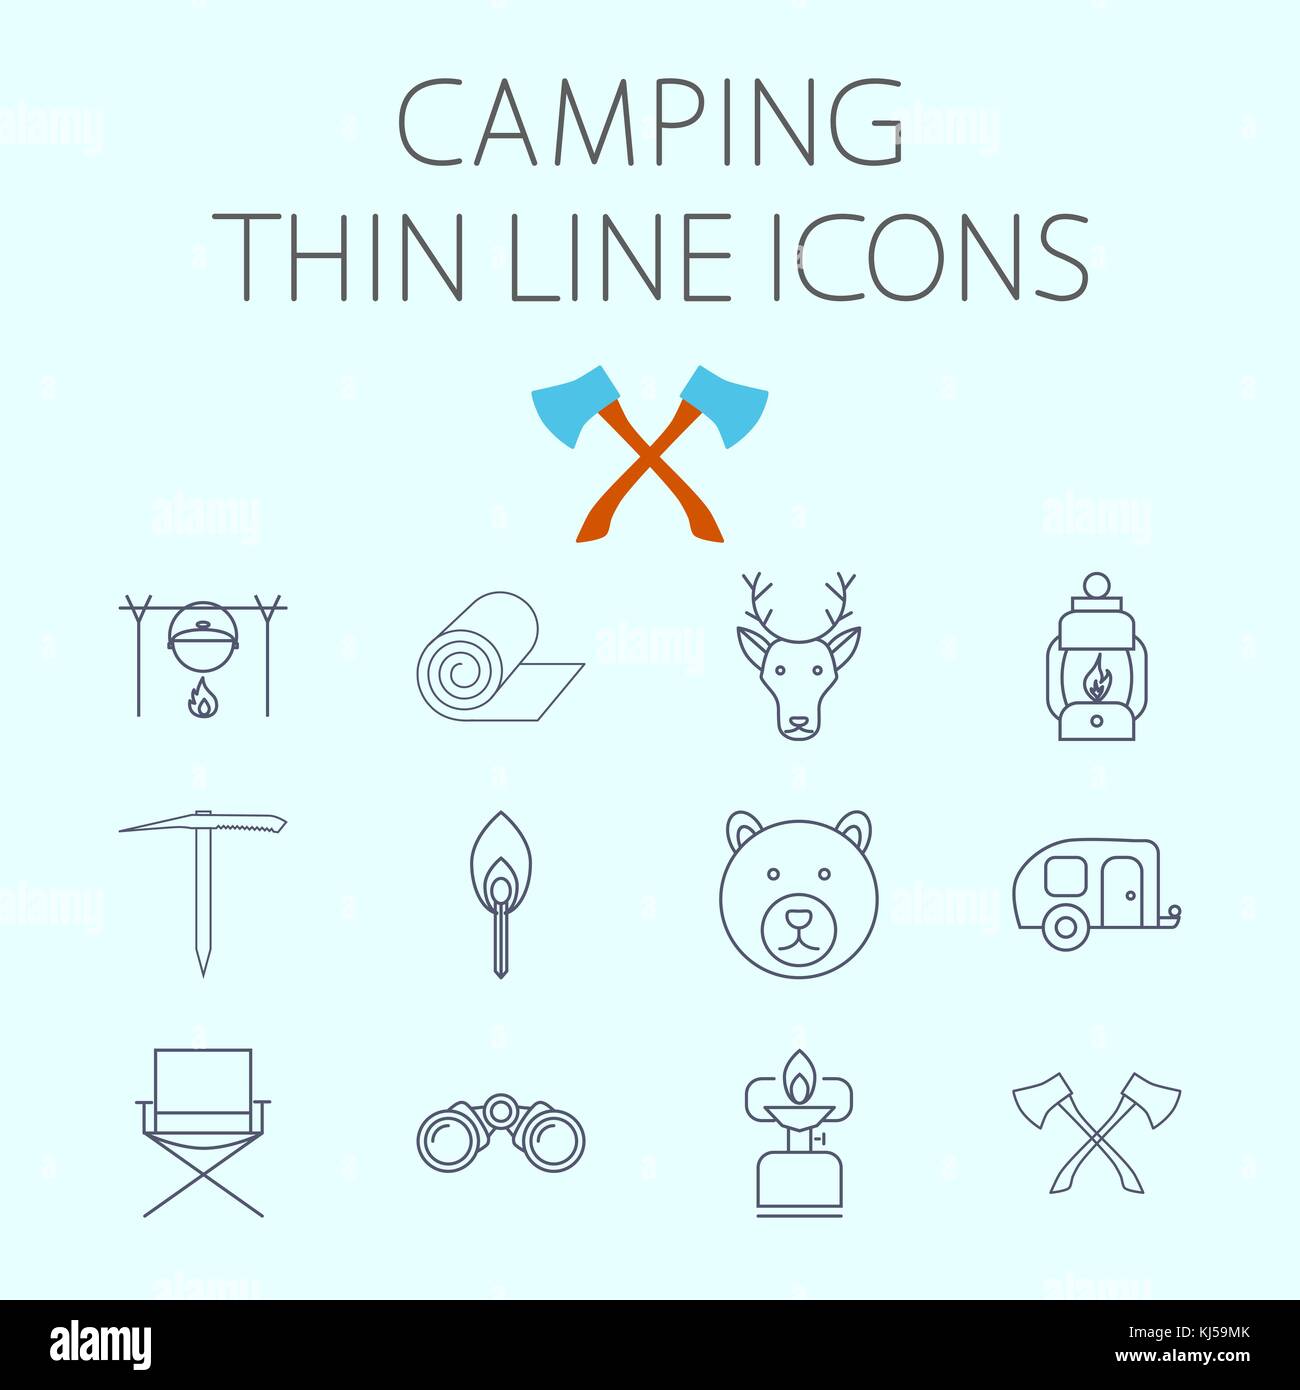 Camping thin line vector icon for web and mobile applications. Set includes - pot, mat, deer, lantern, ice axe, bear, chair, axe, match, trailer, bino Stock Vector